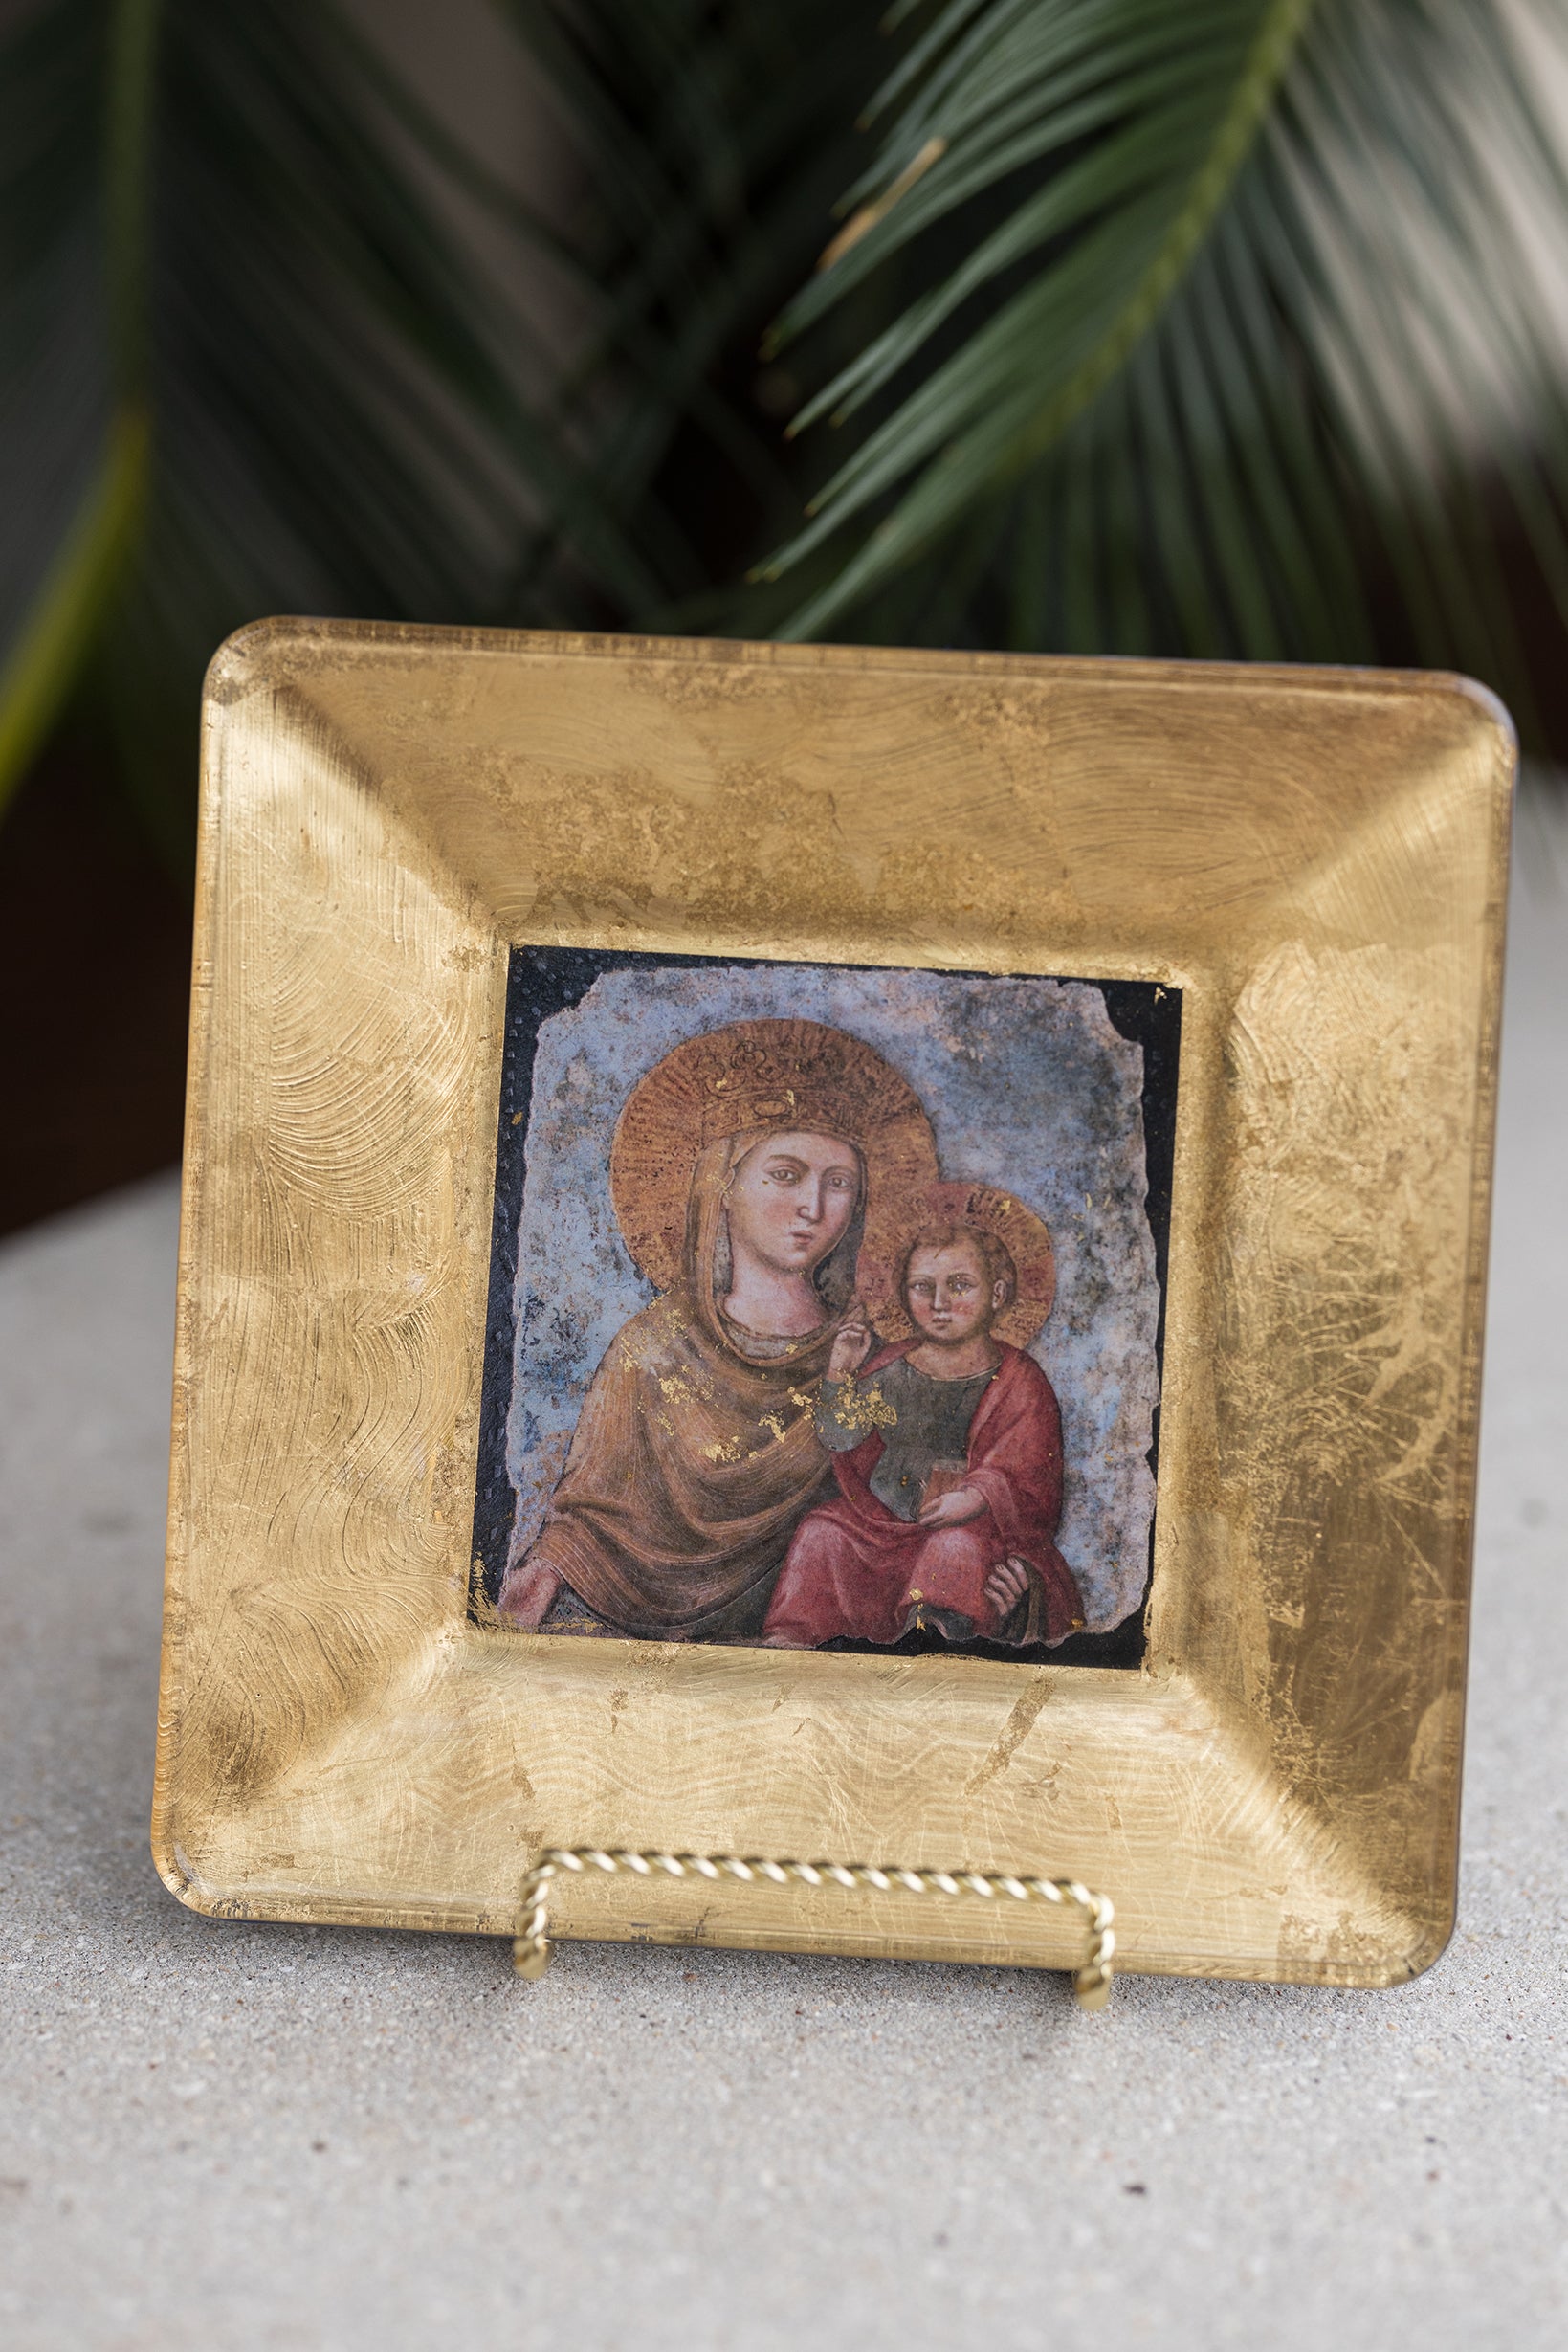 Wilder Decoupage.  Madonna della Strada image.  8 x 8 beveled gold leaf square plate.  Signed and numbered by the artist.